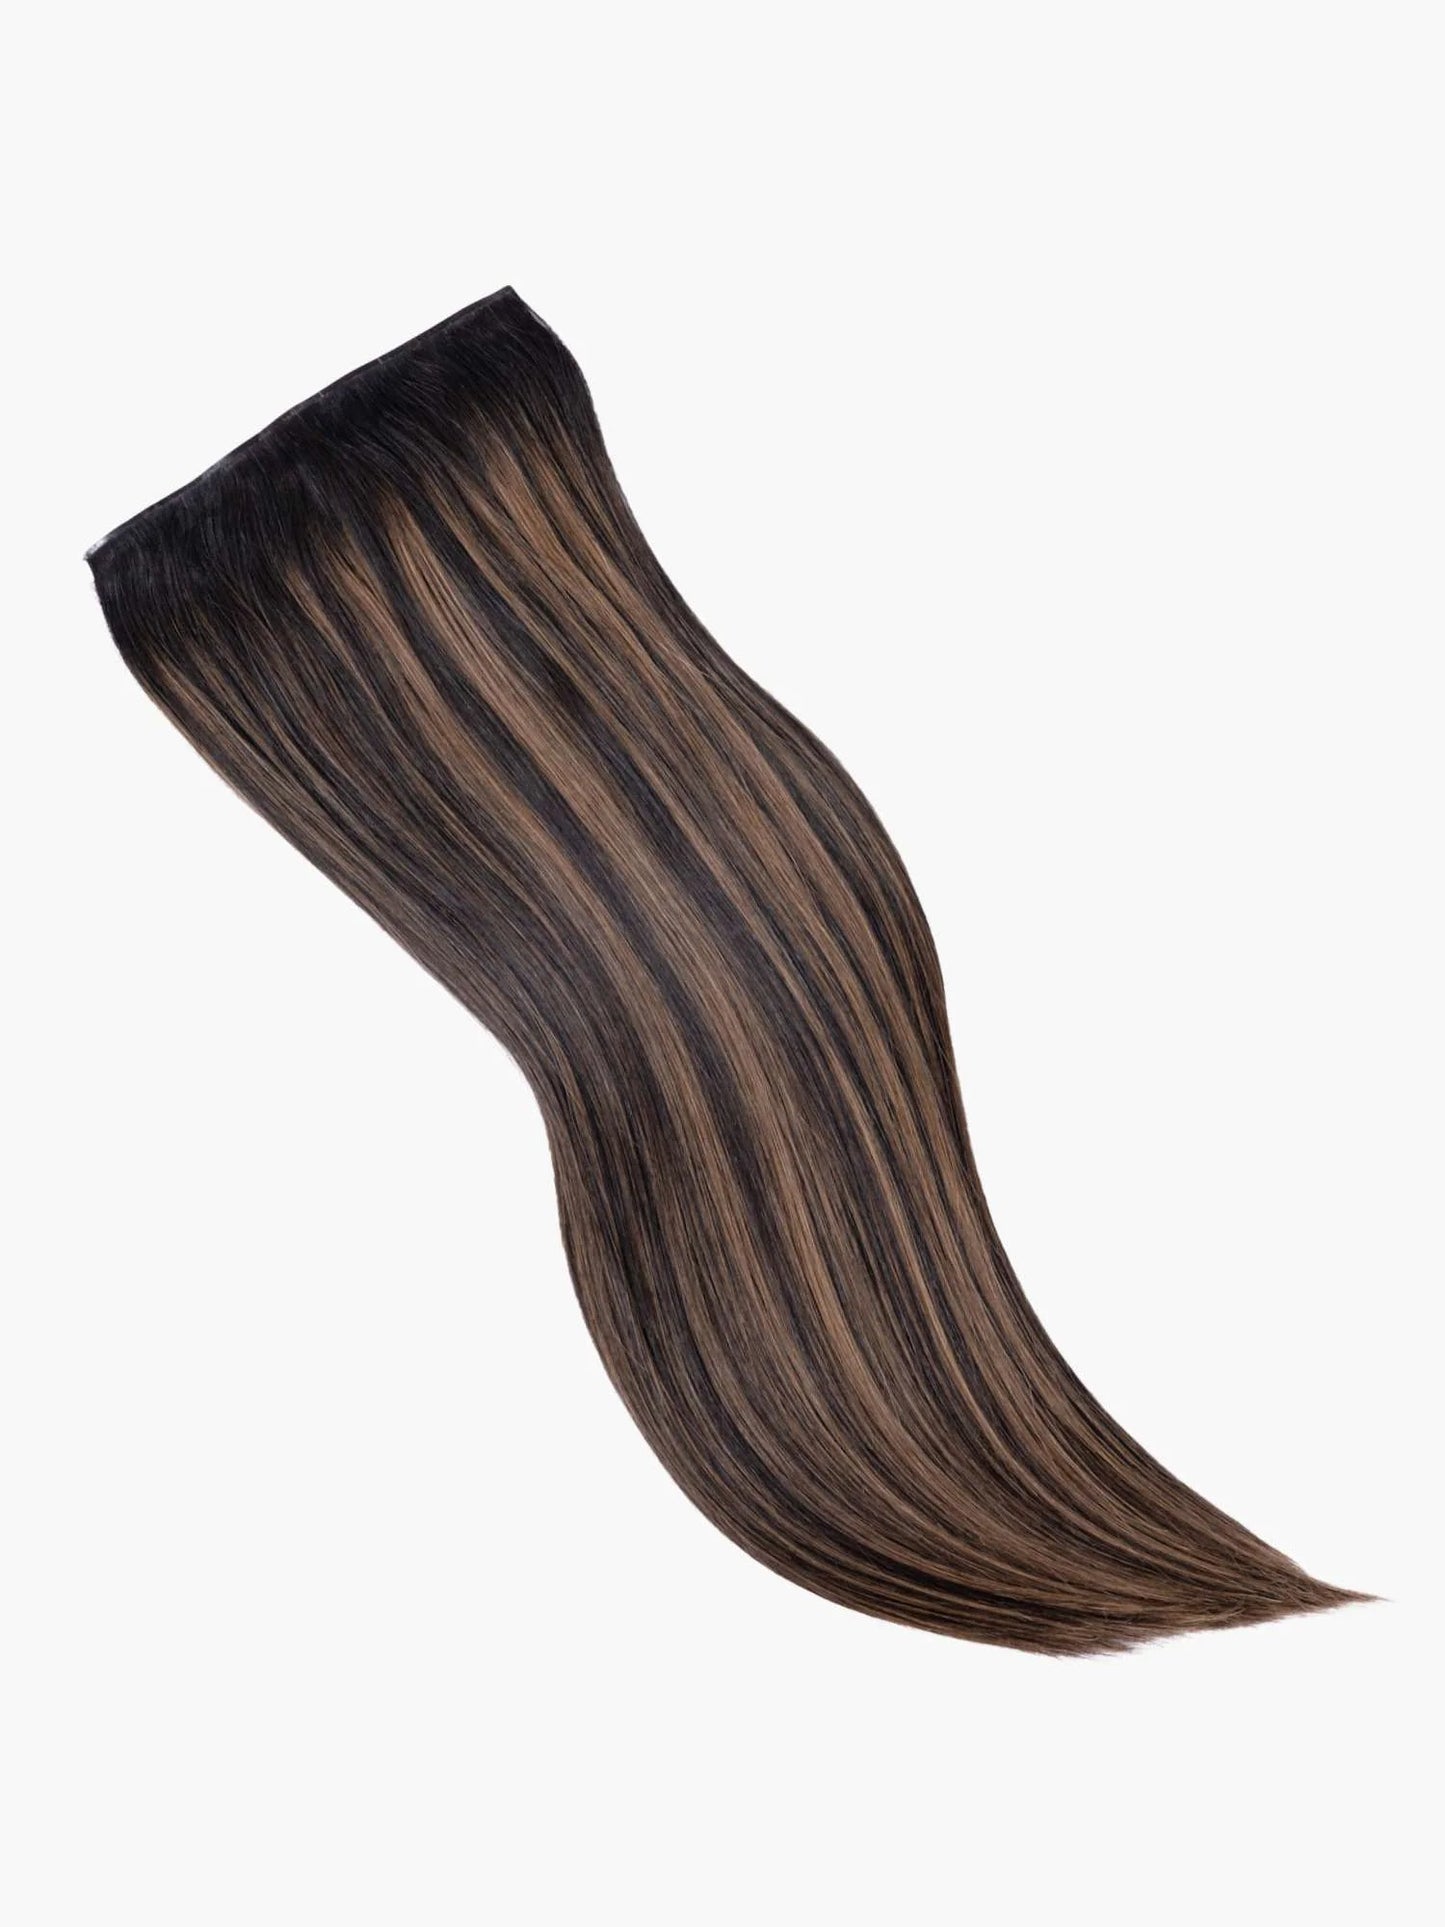 Lush Locks Clip in highlighted Human Hair Natural Extensions